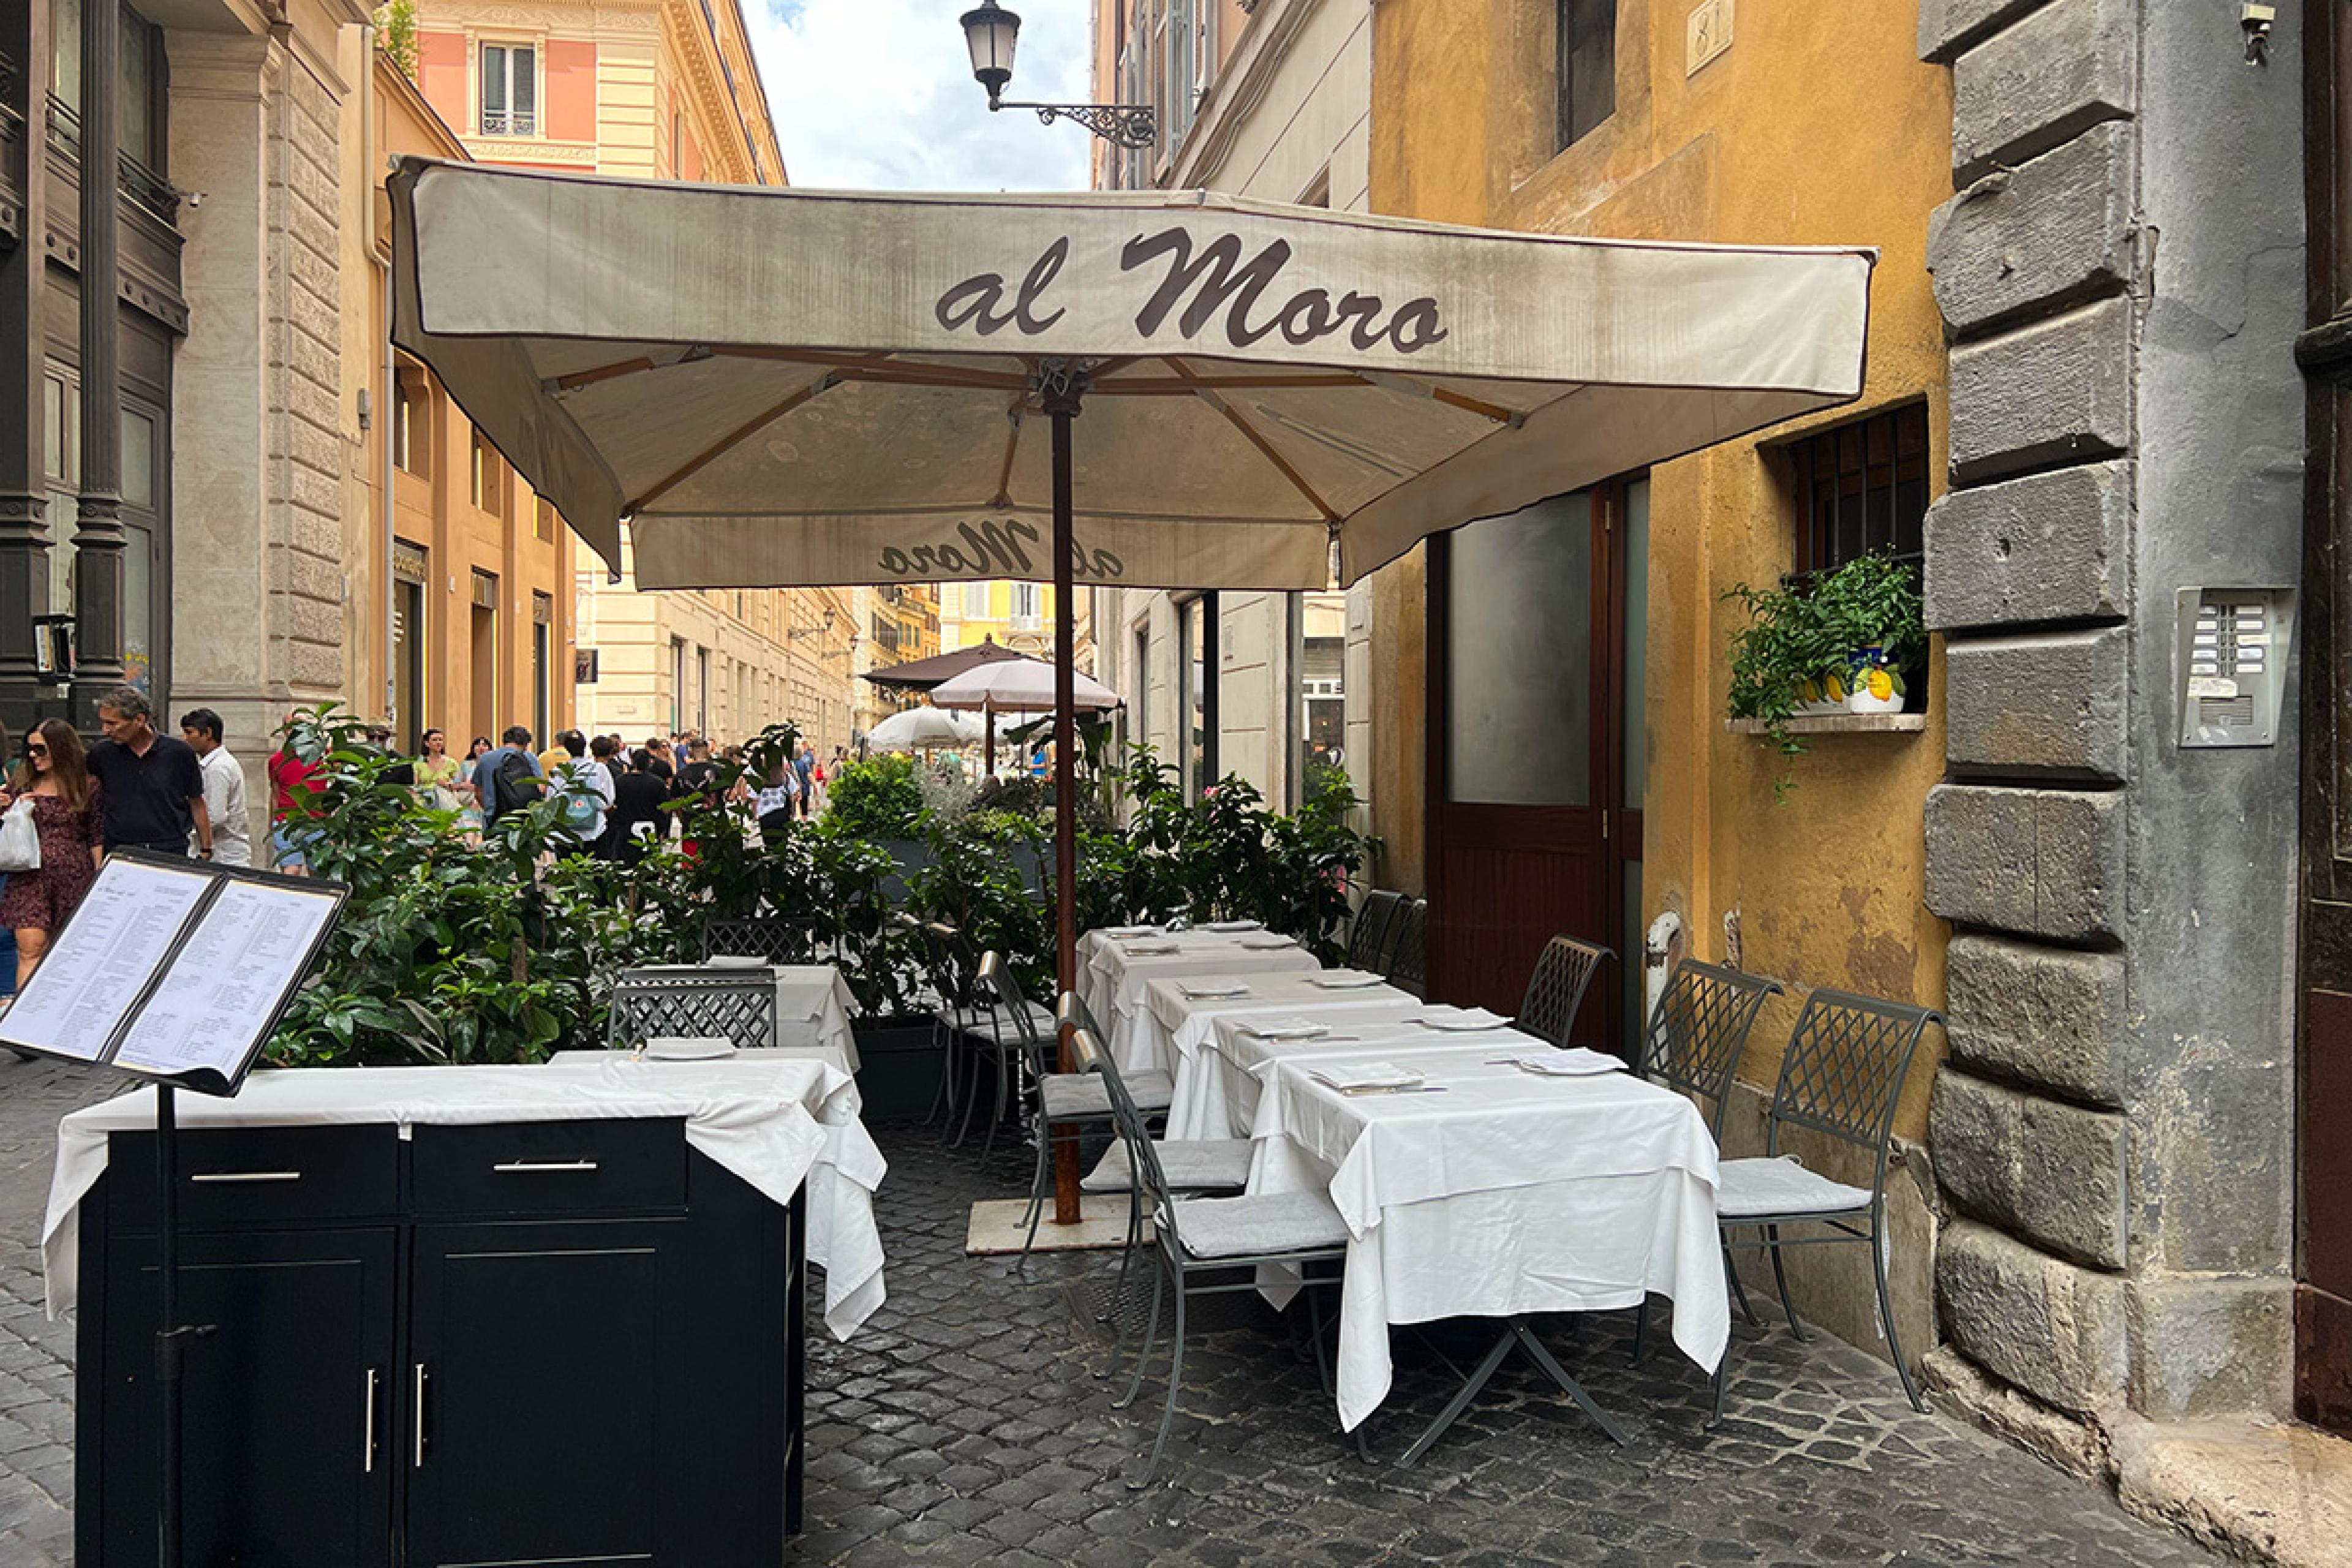 tables with white tablecloths on a cobblestoned street